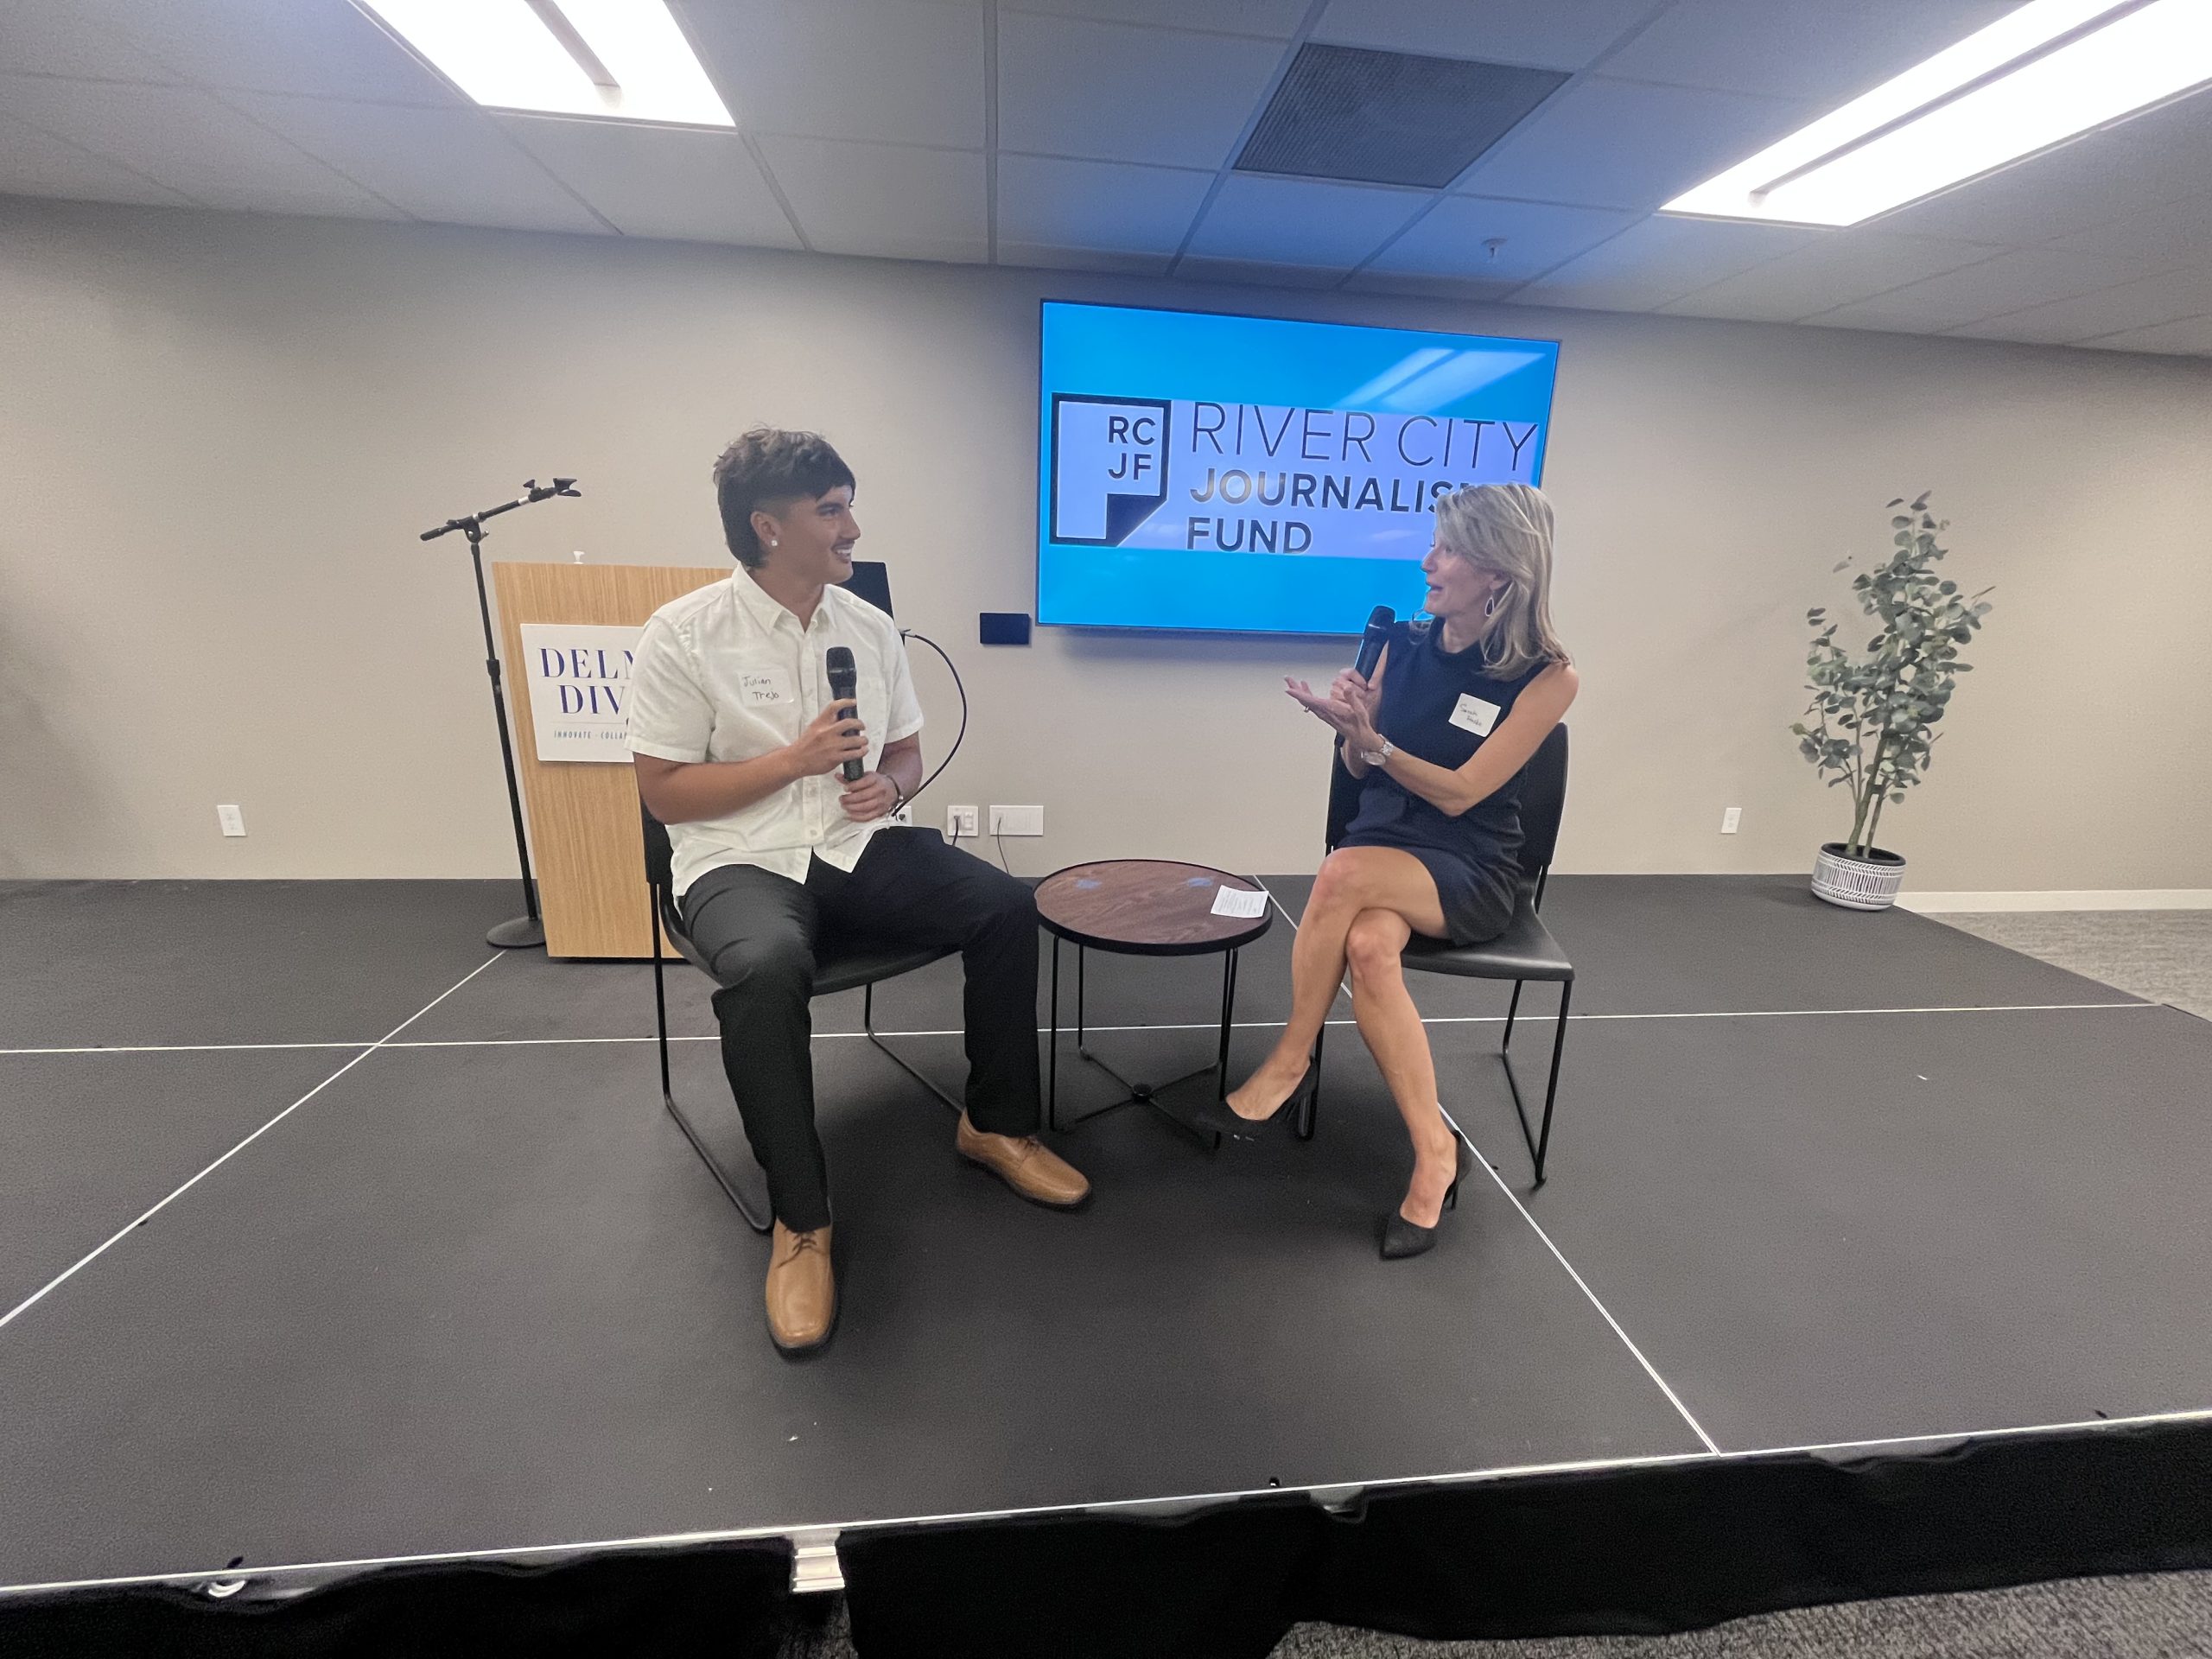 River City’s inaugural fellow, Julian Trejo, describes how he came to write about his incarcerated father in a cover story for the St. Louis Riverfront Times in a conversation with RCJF Executive Director Sarah Fenske.